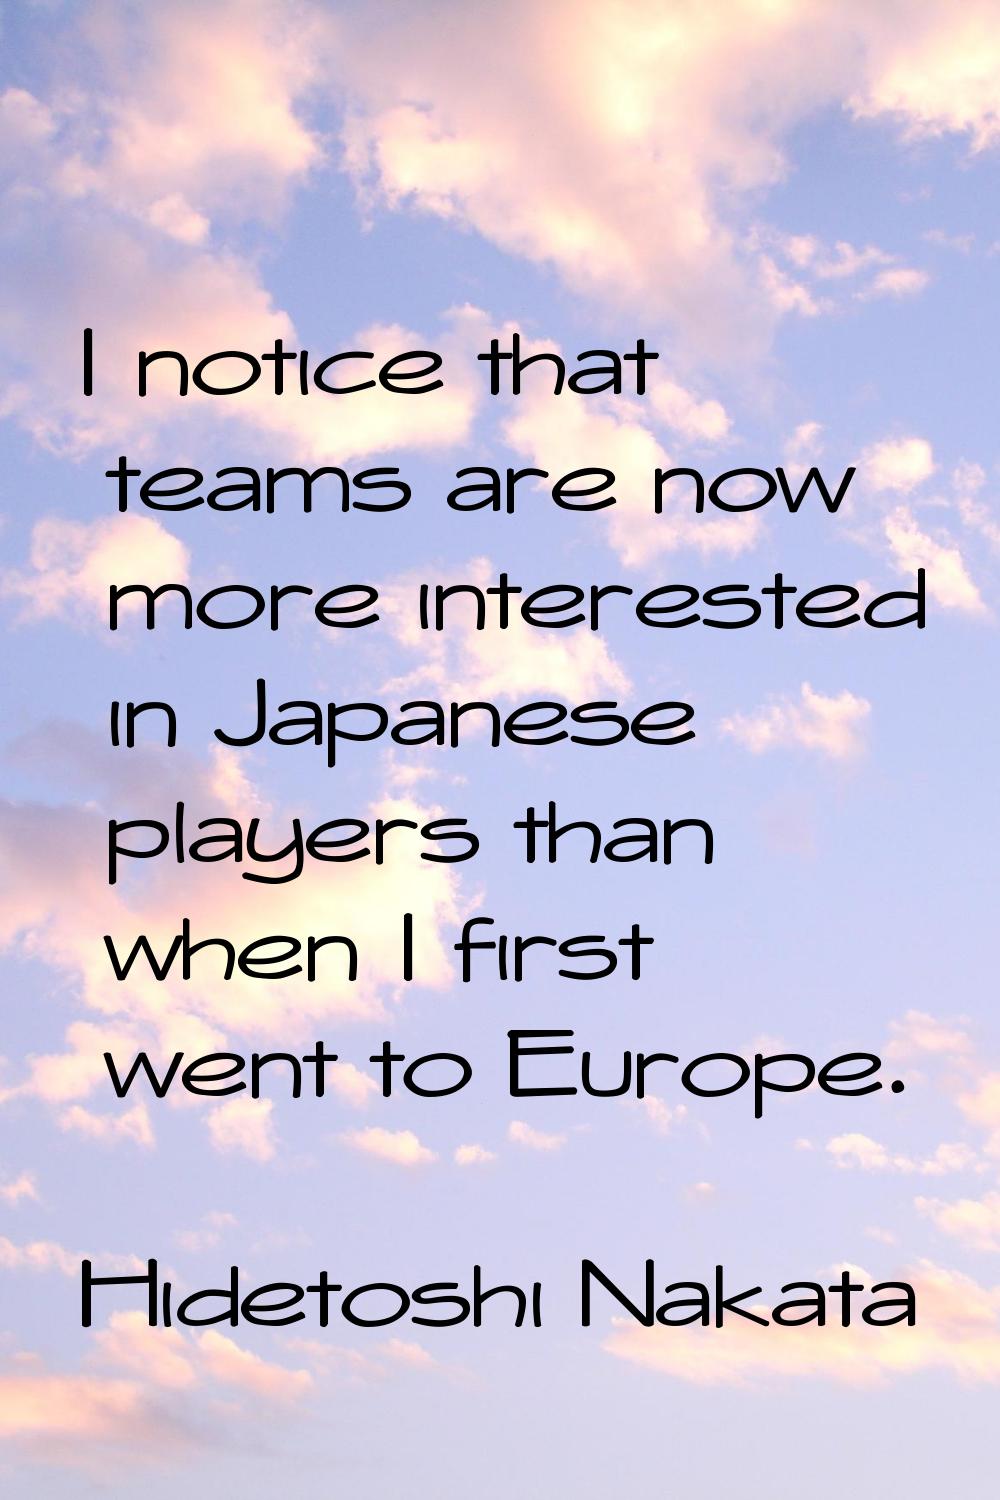 I notice that teams are now more interested in Japanese players than when I first went to Europe.